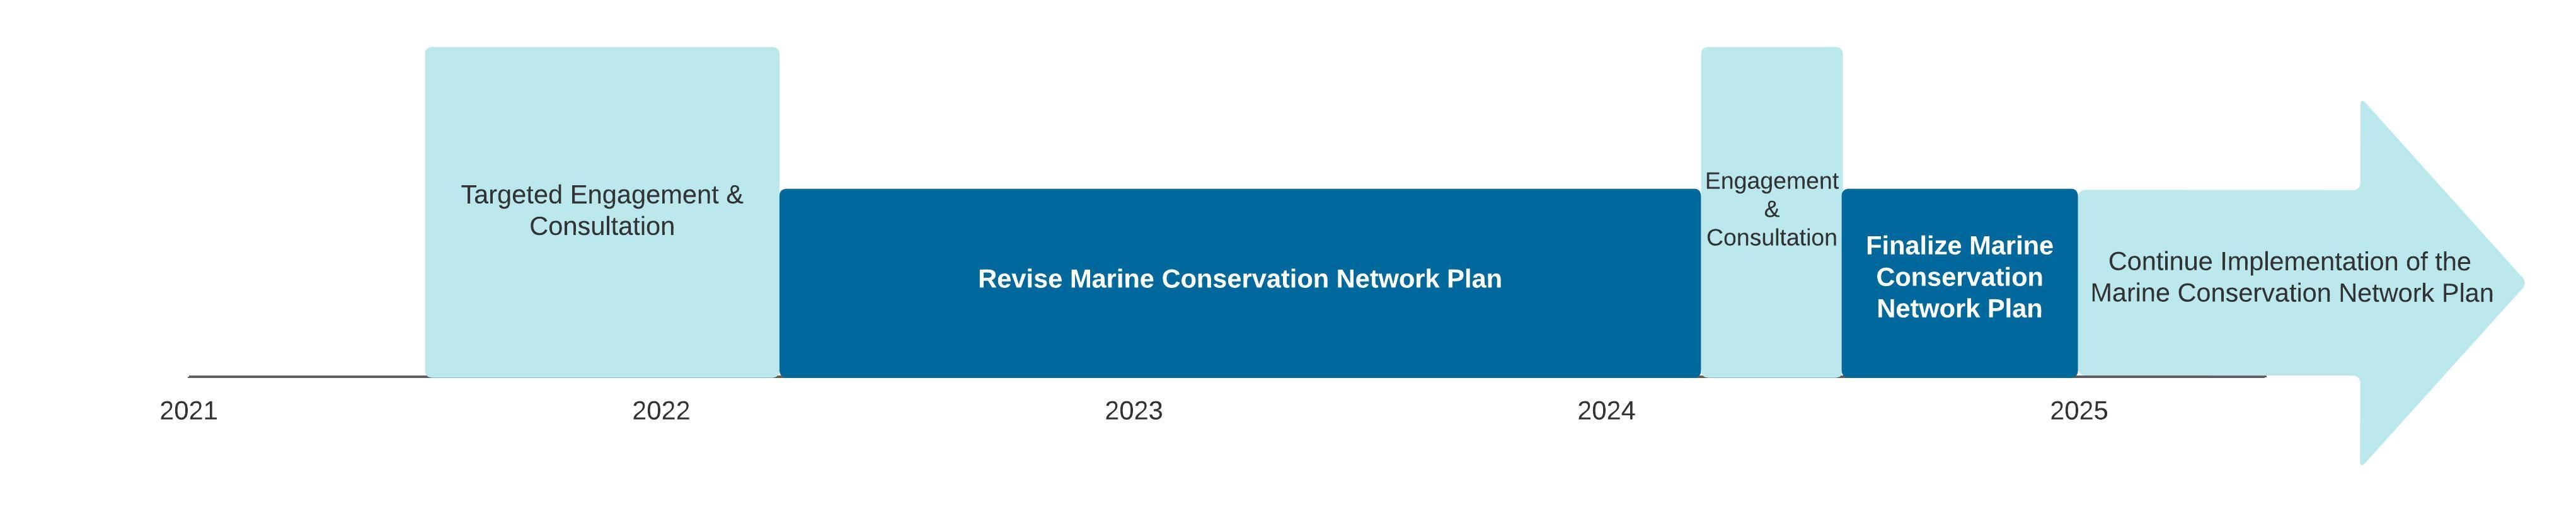 Timeline for developing the Conservation Network Plan for the Scotian Shelf-Bay of Fundy Bioregion – updated November 2021